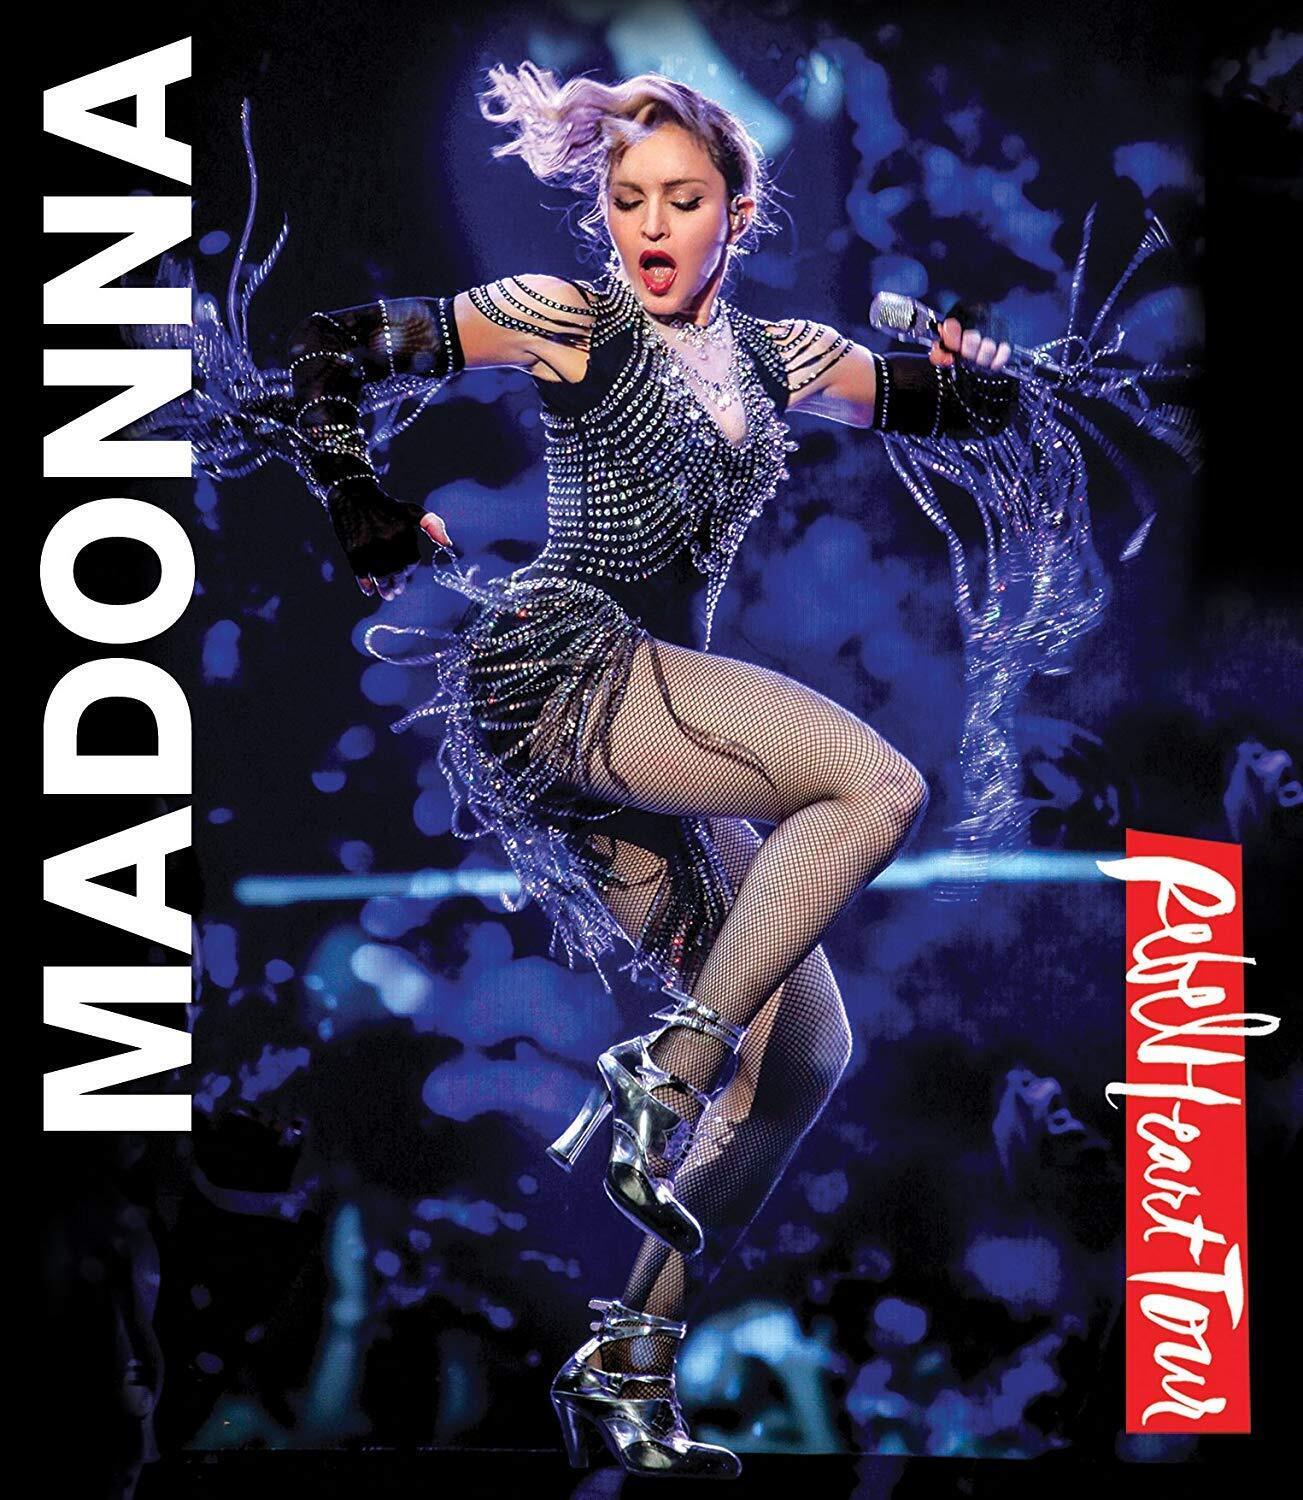 MADONNA Rebel Heart Tour Blu-ray 2017 from